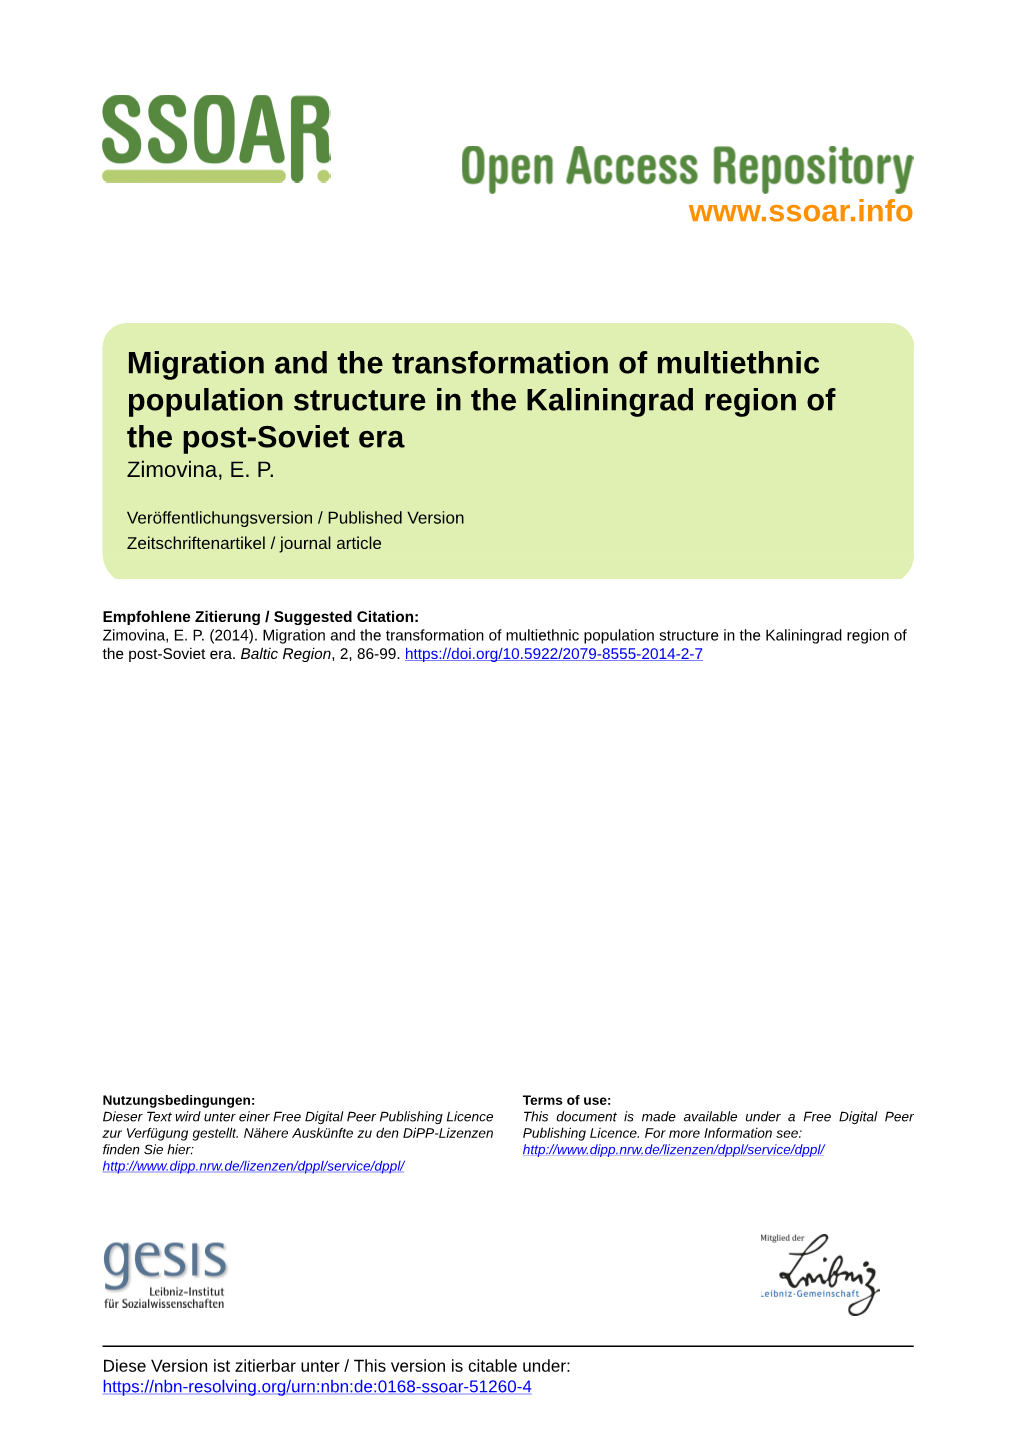 Migration and the Transformation of Multiethnic Population Structure in the Kaliningrad Region of the Post-Soviet Era Zimovina, E